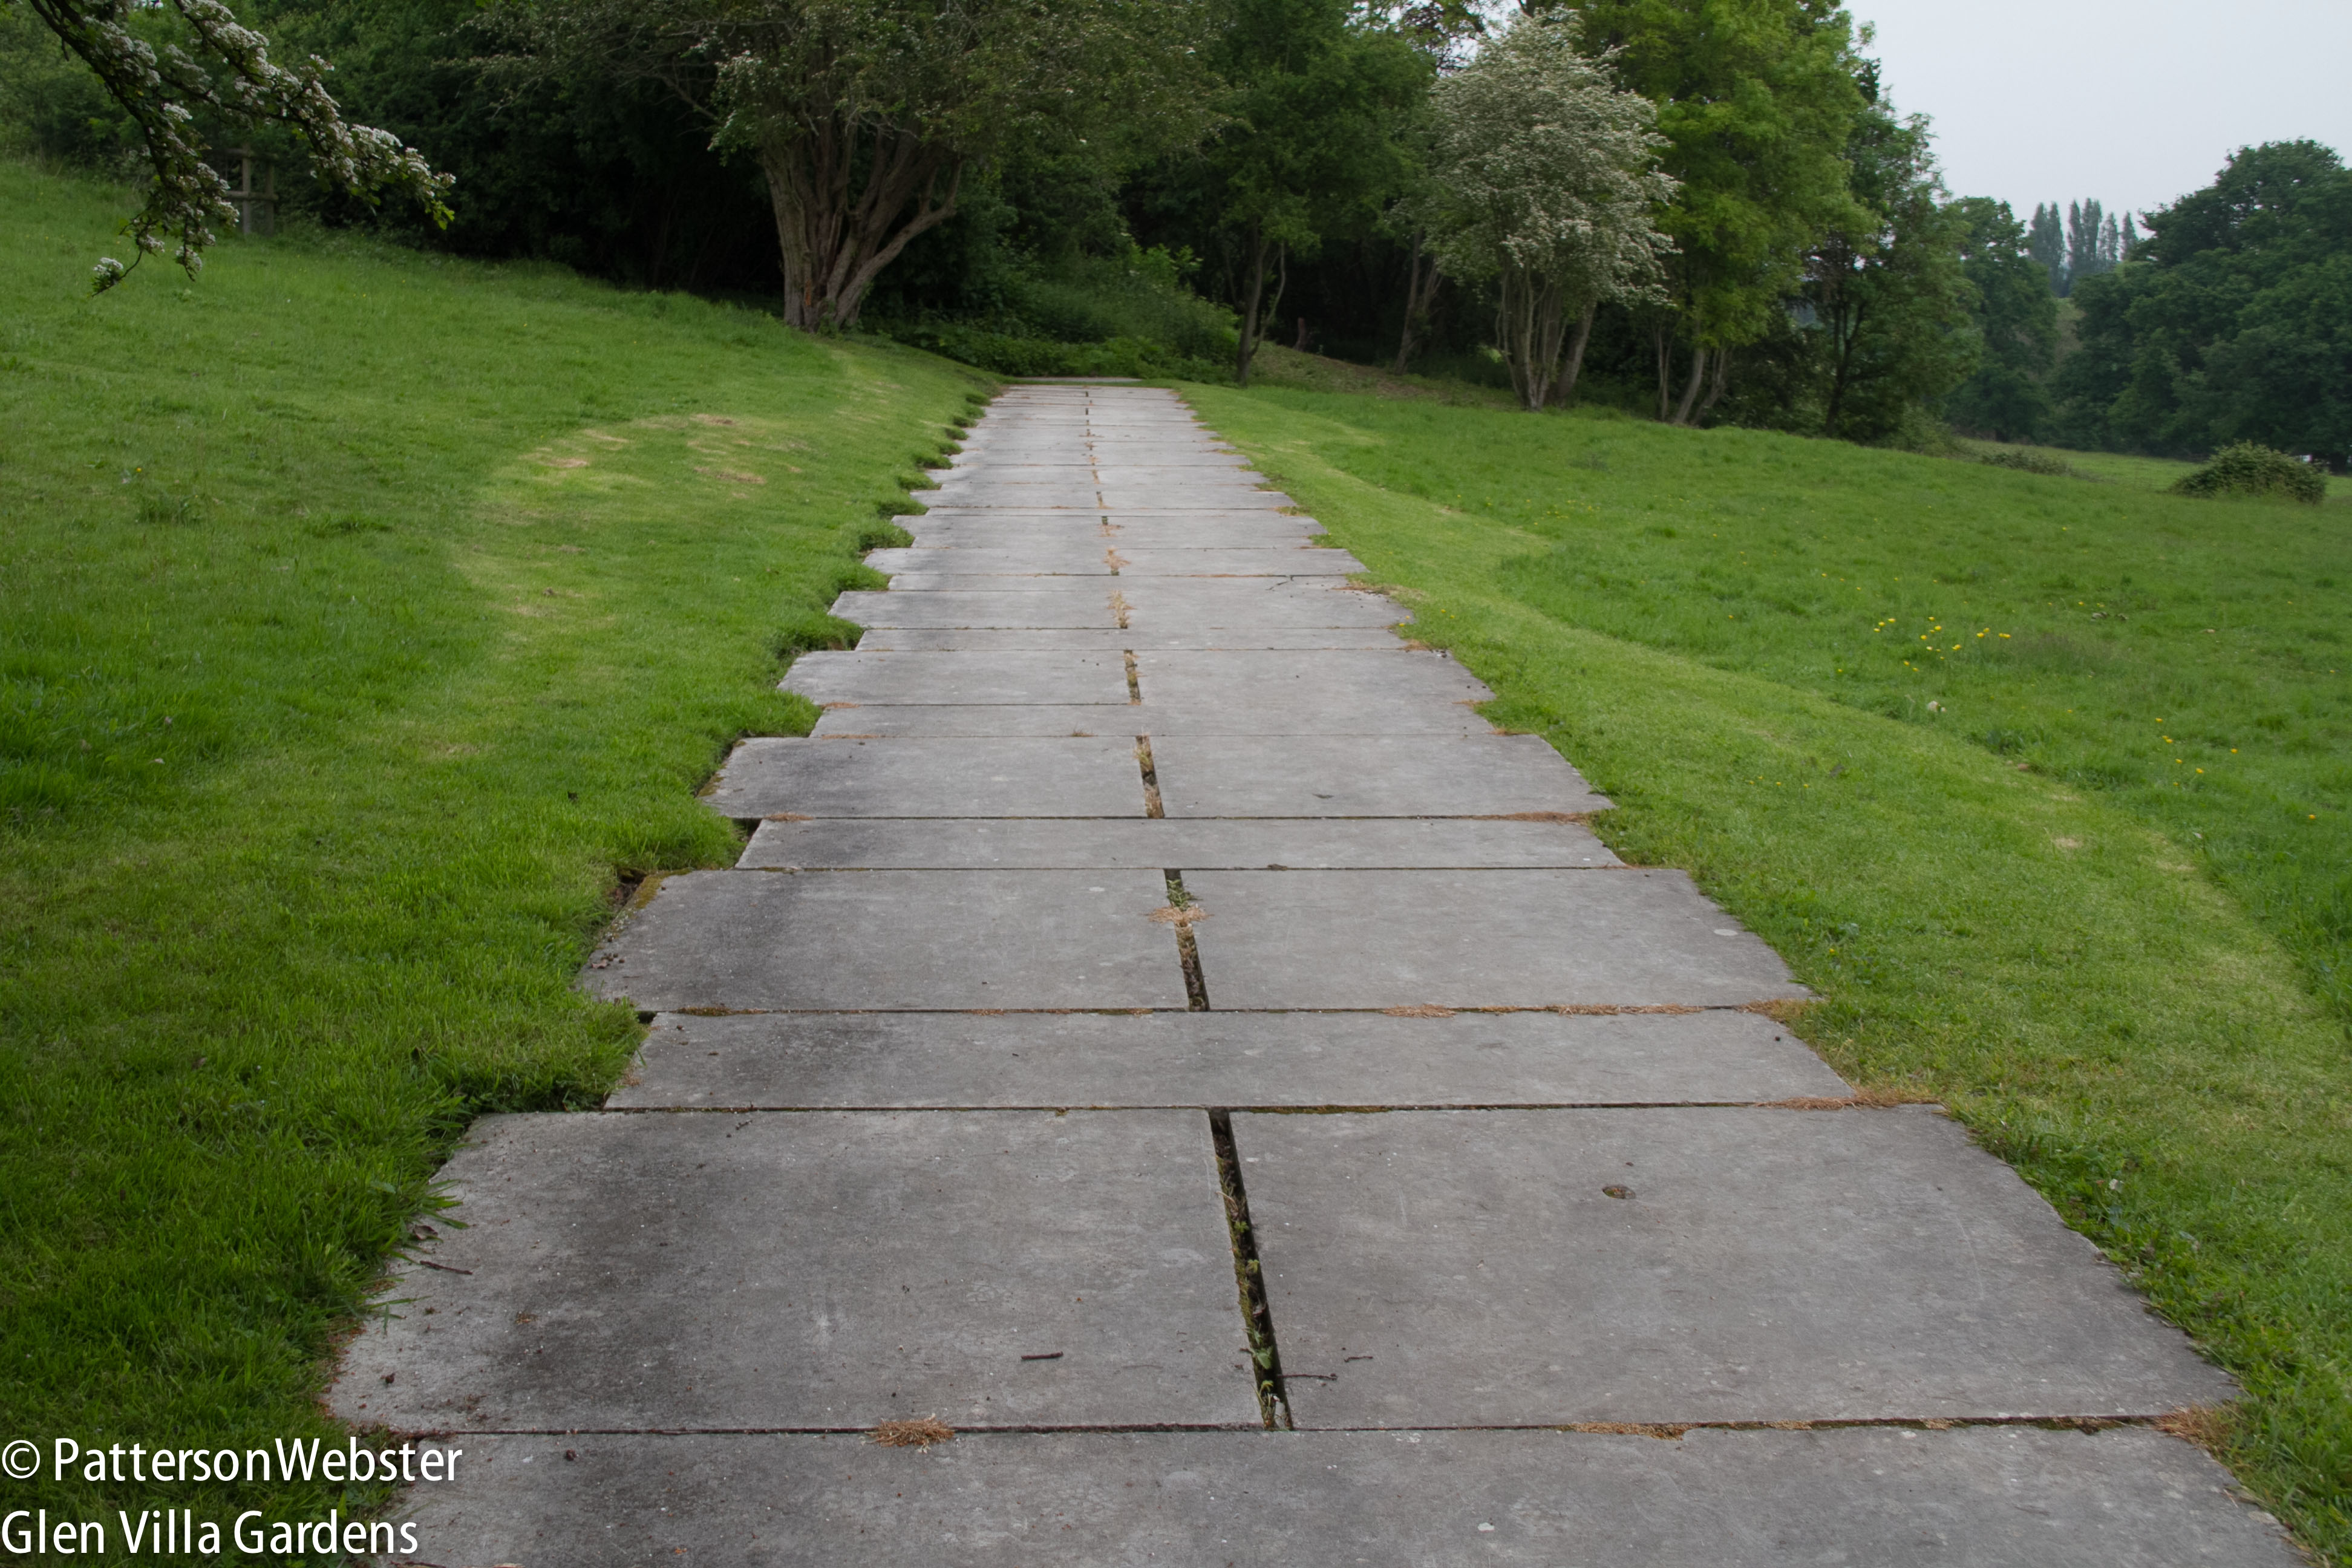 The uneven edge of the path suggests crenallations on a fortified building. The whirly mowing pattern doesn't. 